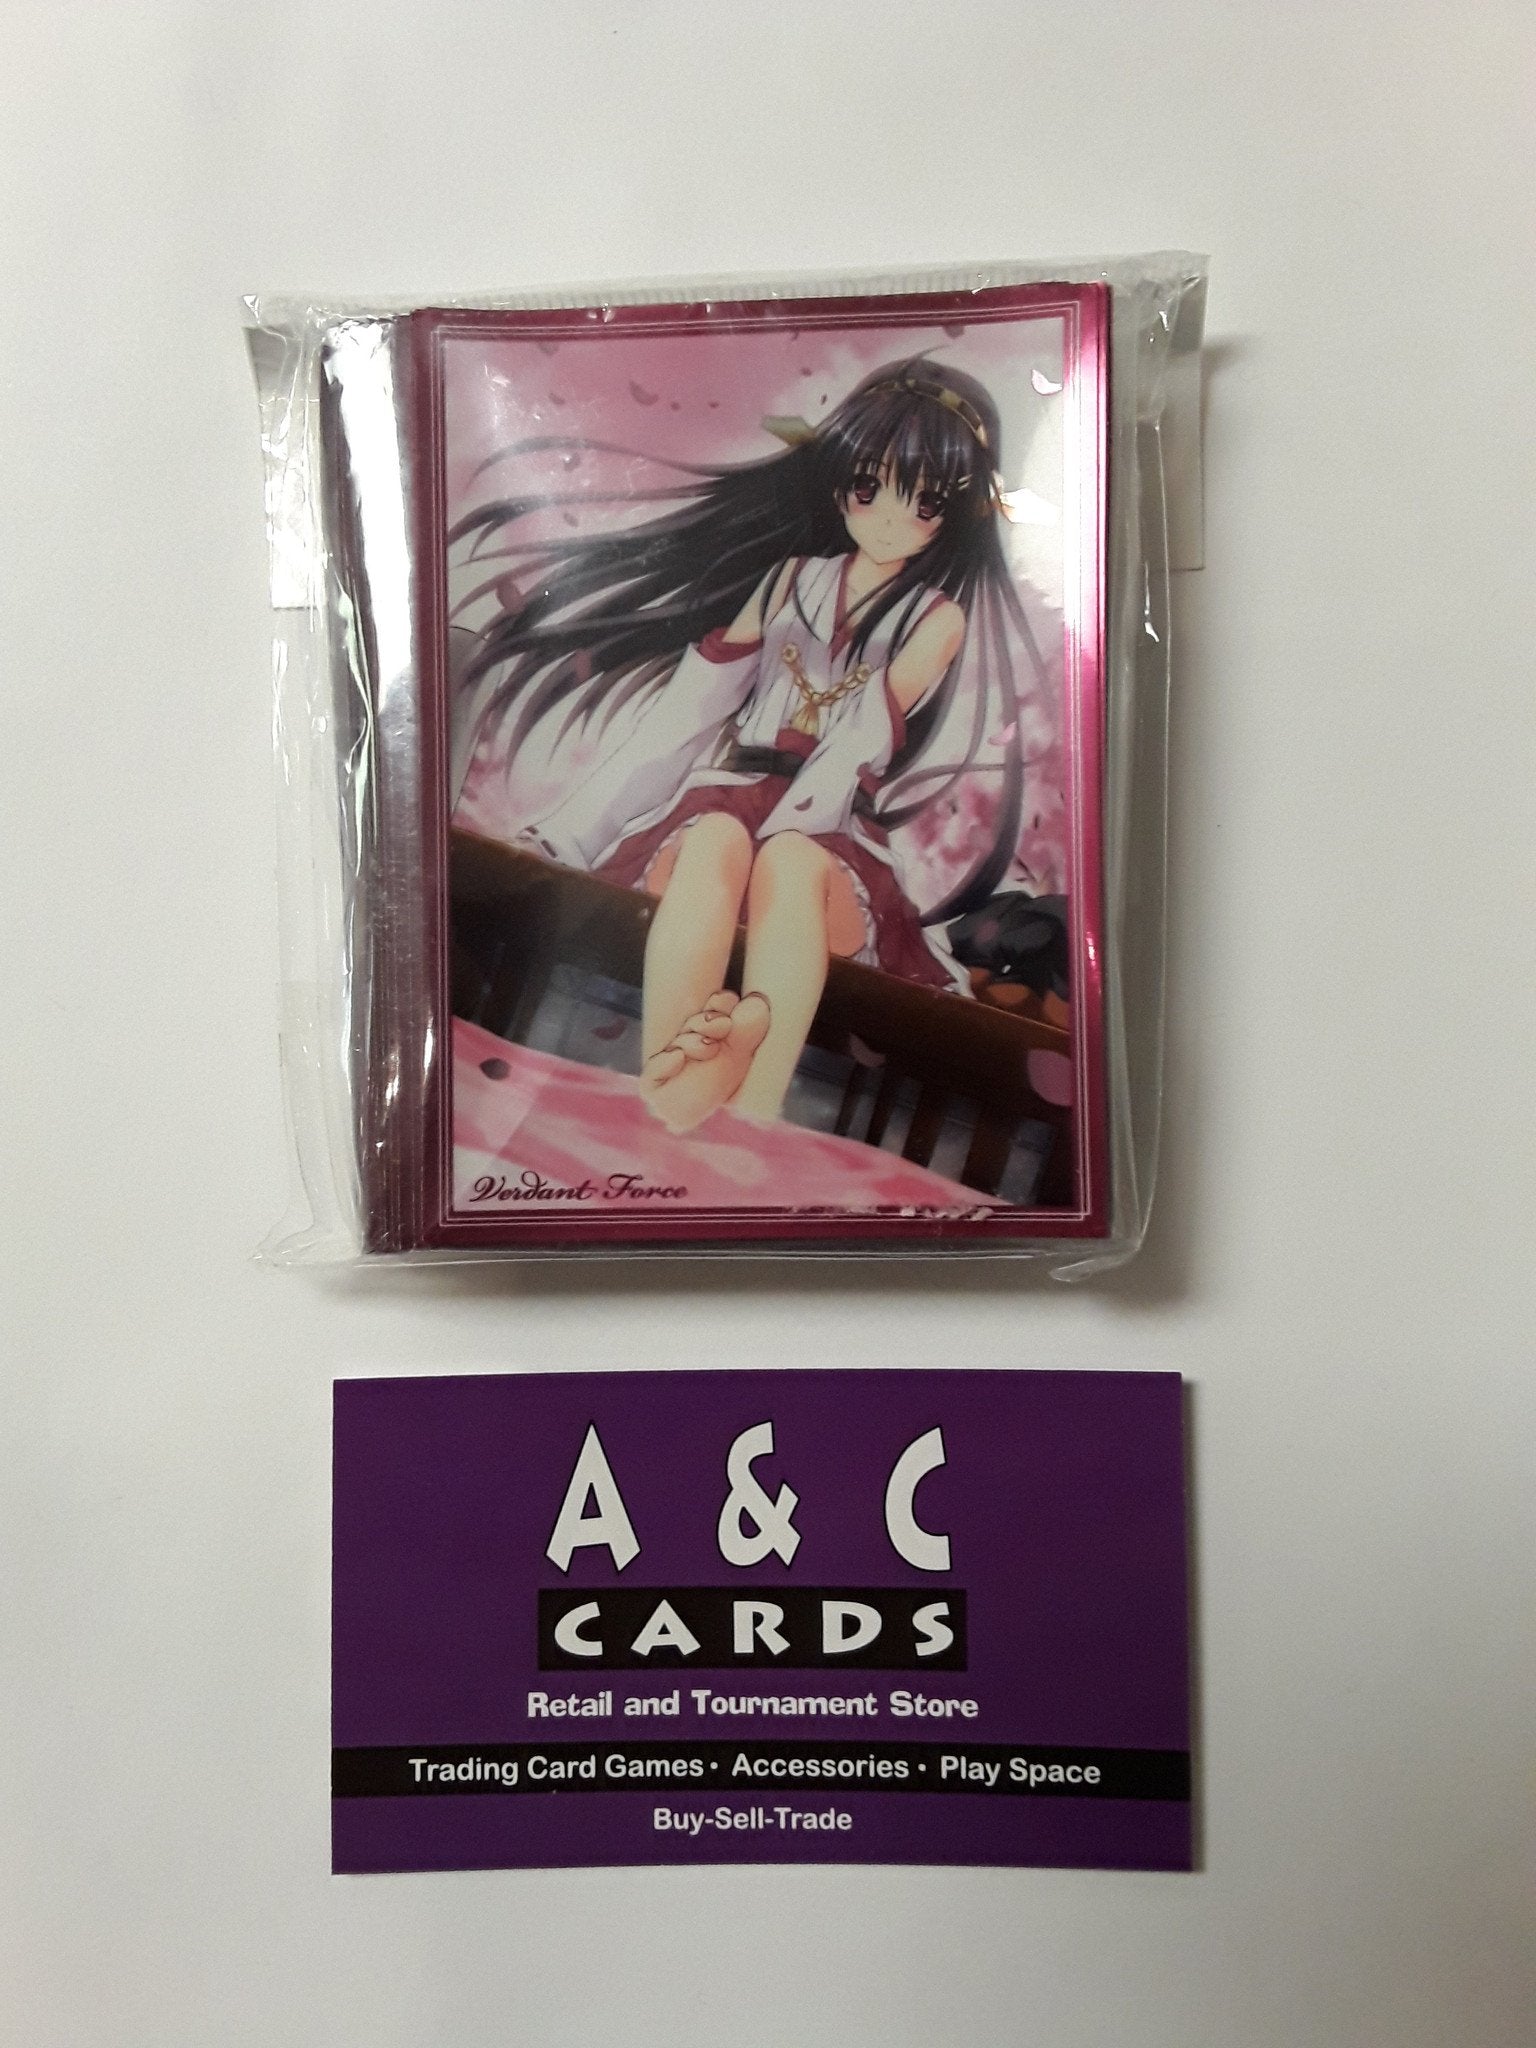 Character Sleeves "Haruna" #6 - 1 pack of Standard Size Sleeves - Kantai Collection